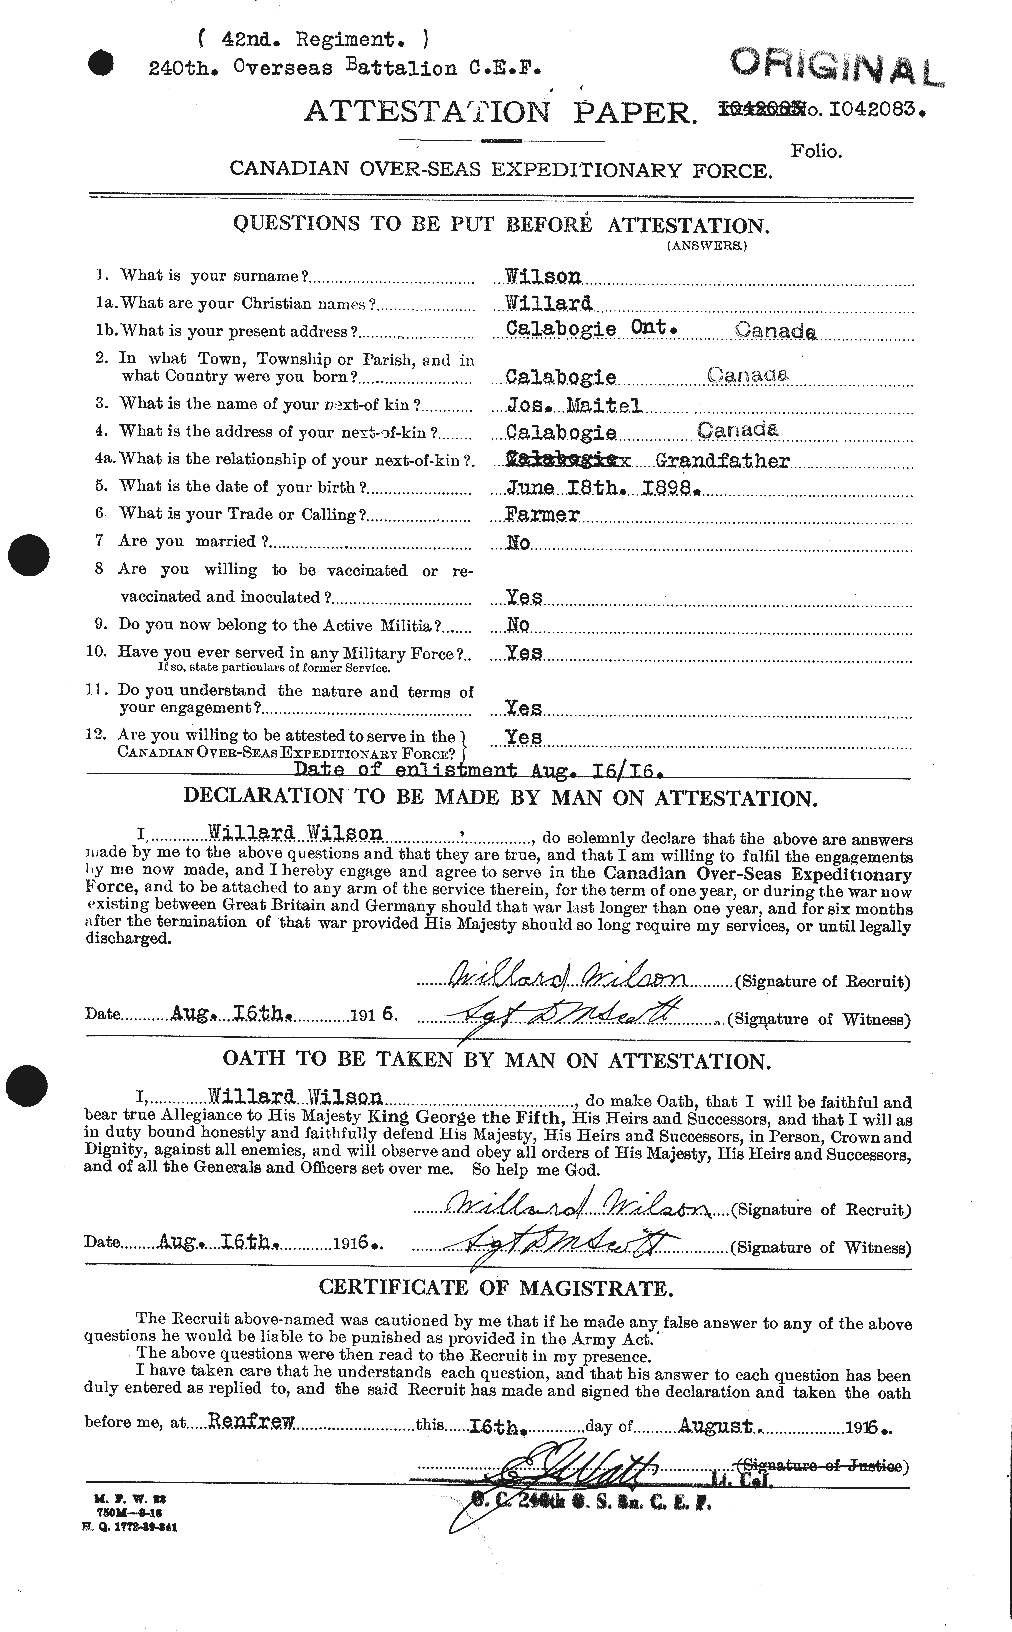 Personnel Records of the First World War - CEF 681801a